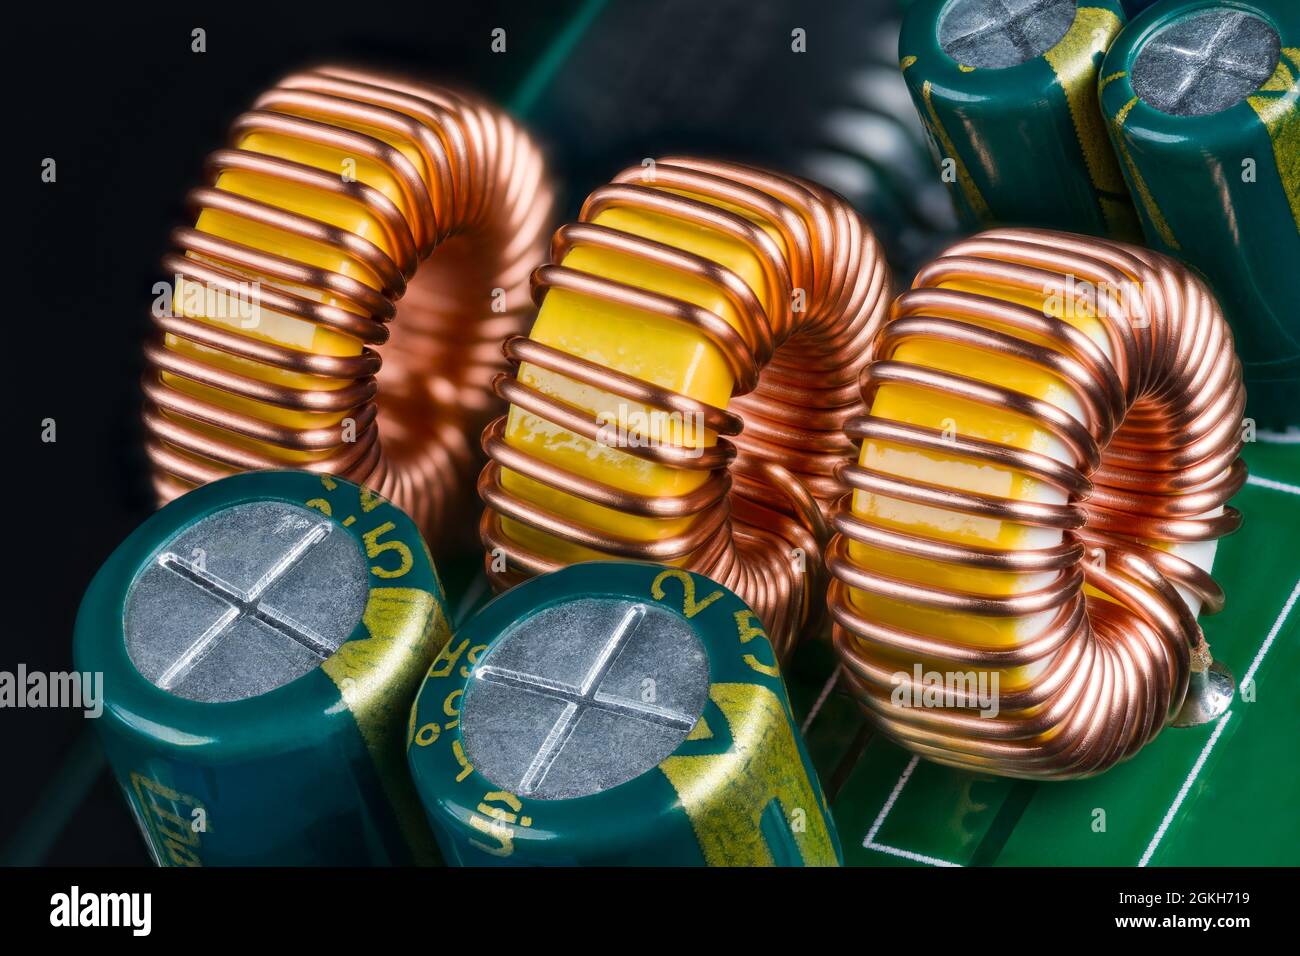 Yellow ferrite cores of toroidal inductors wrapped with copper wire on green printed circuit board. Closeup of coils or electrolytic capacitors on PCB. Stock Photo